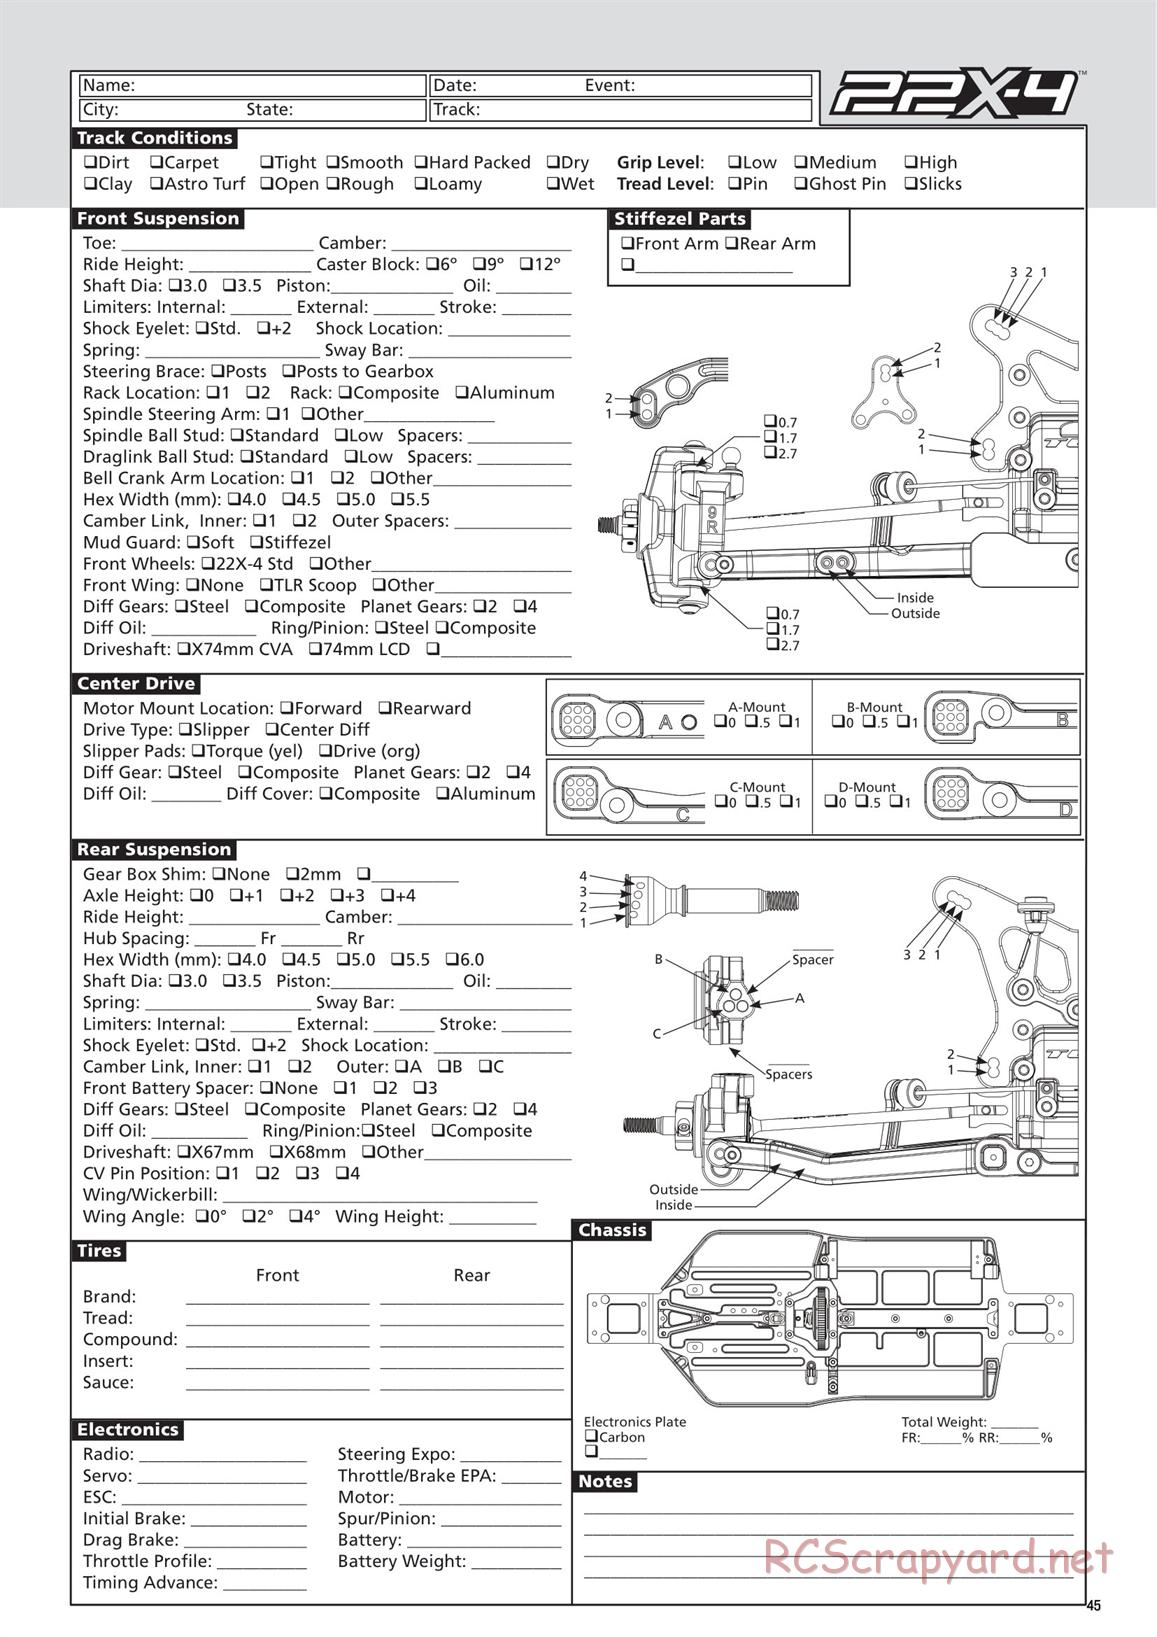 Team Losi - TLR 22X-4 Race - Manual - Page 45